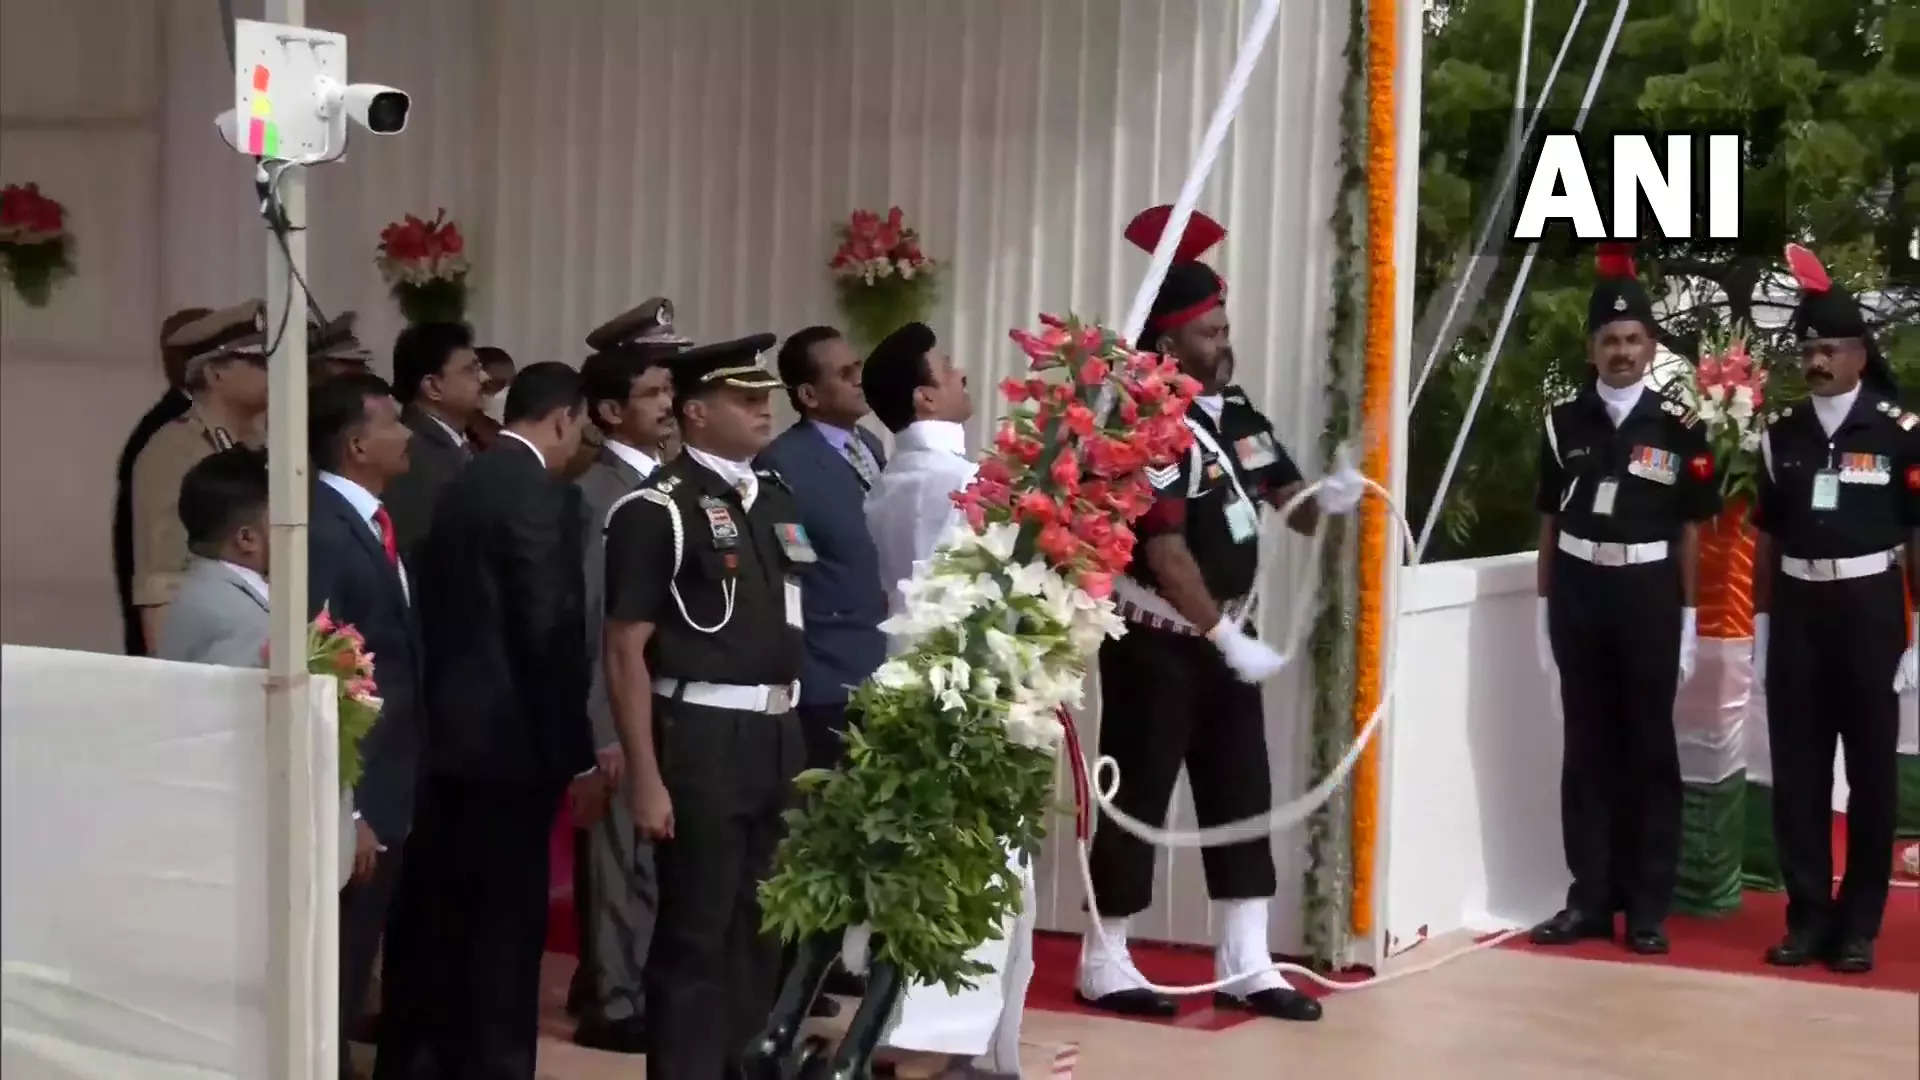 India at 75 CM MK Stalin hoists national flag at Fort St George more than 33000 flags unfurl across Chennai